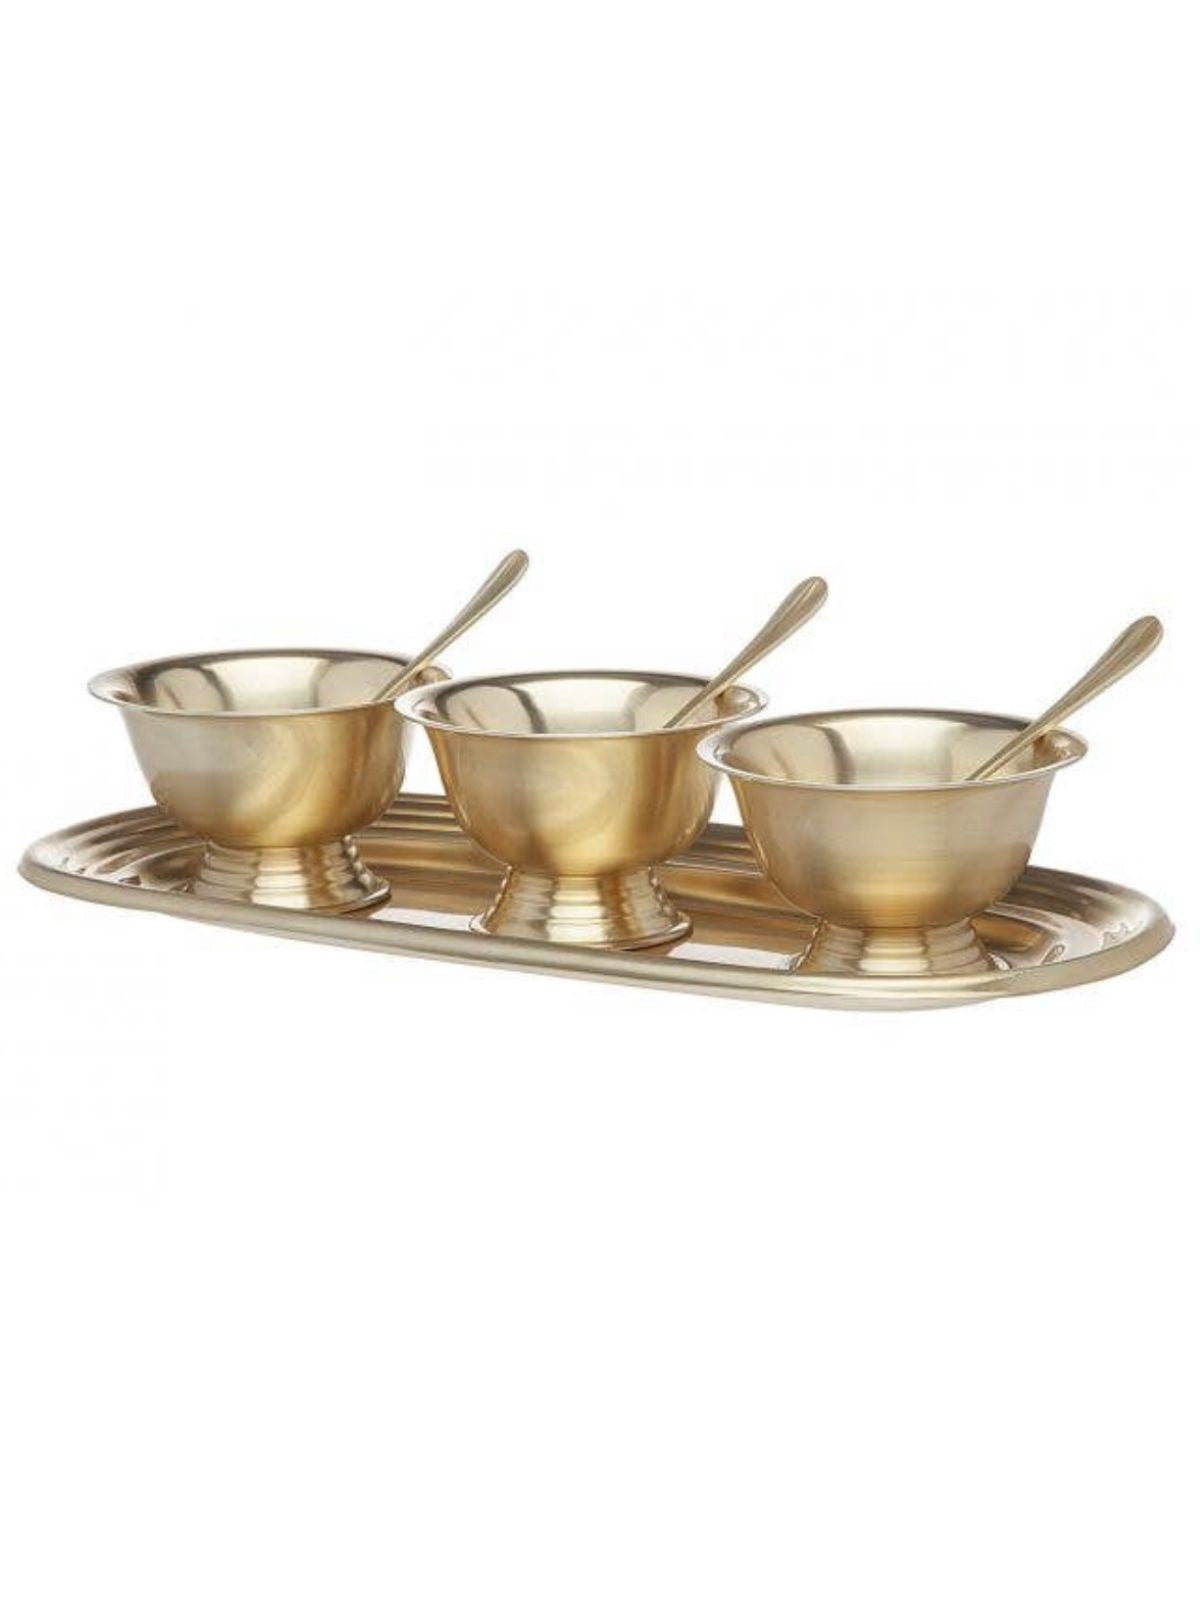 Elevate your serving decor in an luxurious manner with this champagne gold stainless steel 3 bowls set on a rectangle serving tray with elegant spoons to dispense all various foods or sweets From KYA Home Decor